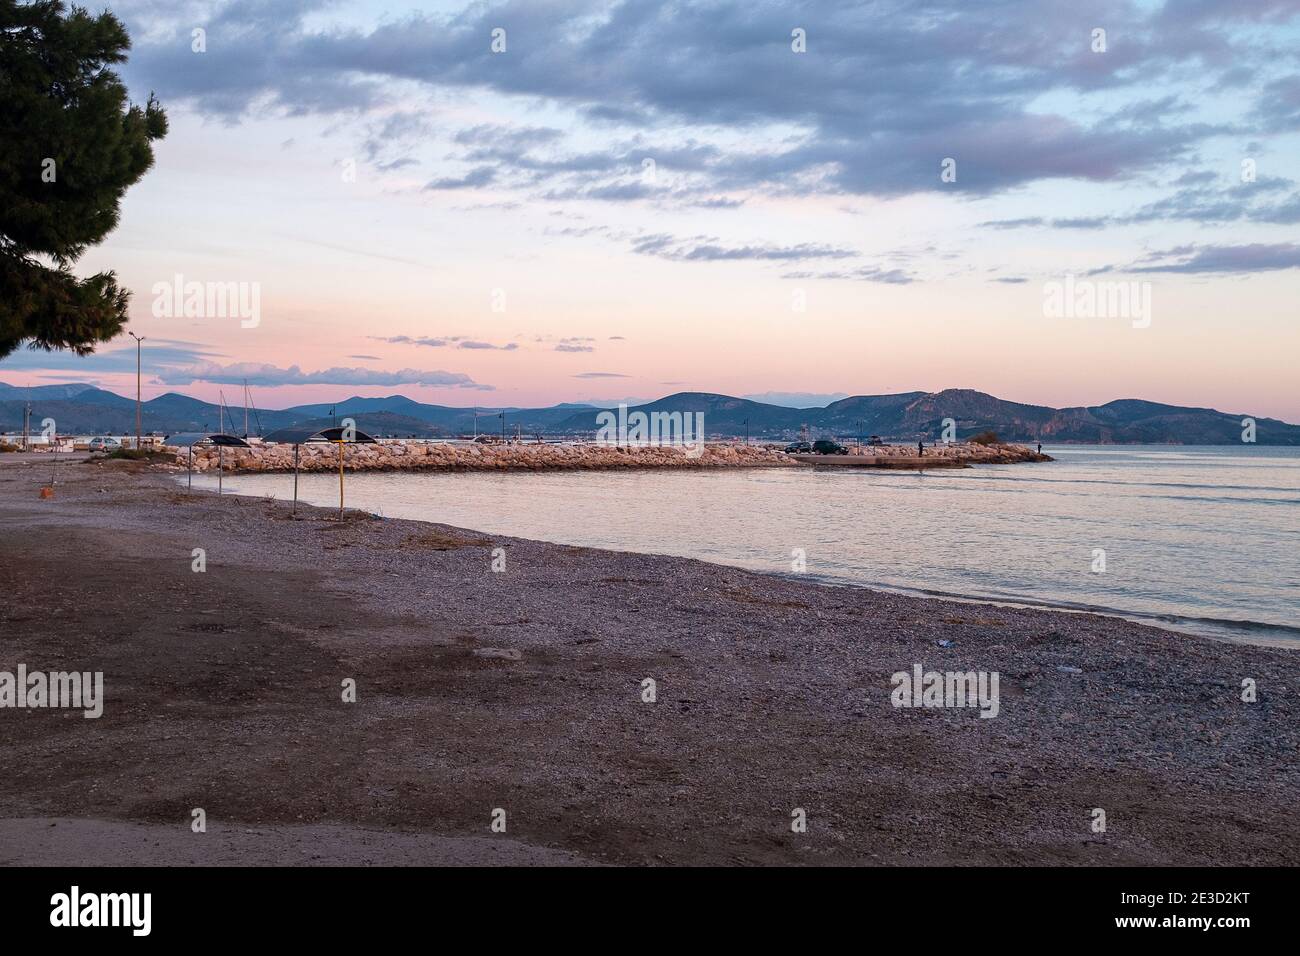 Tolo, Peloponesse, Greece - January 06, 2019: Sunset on the beach Stock Photo